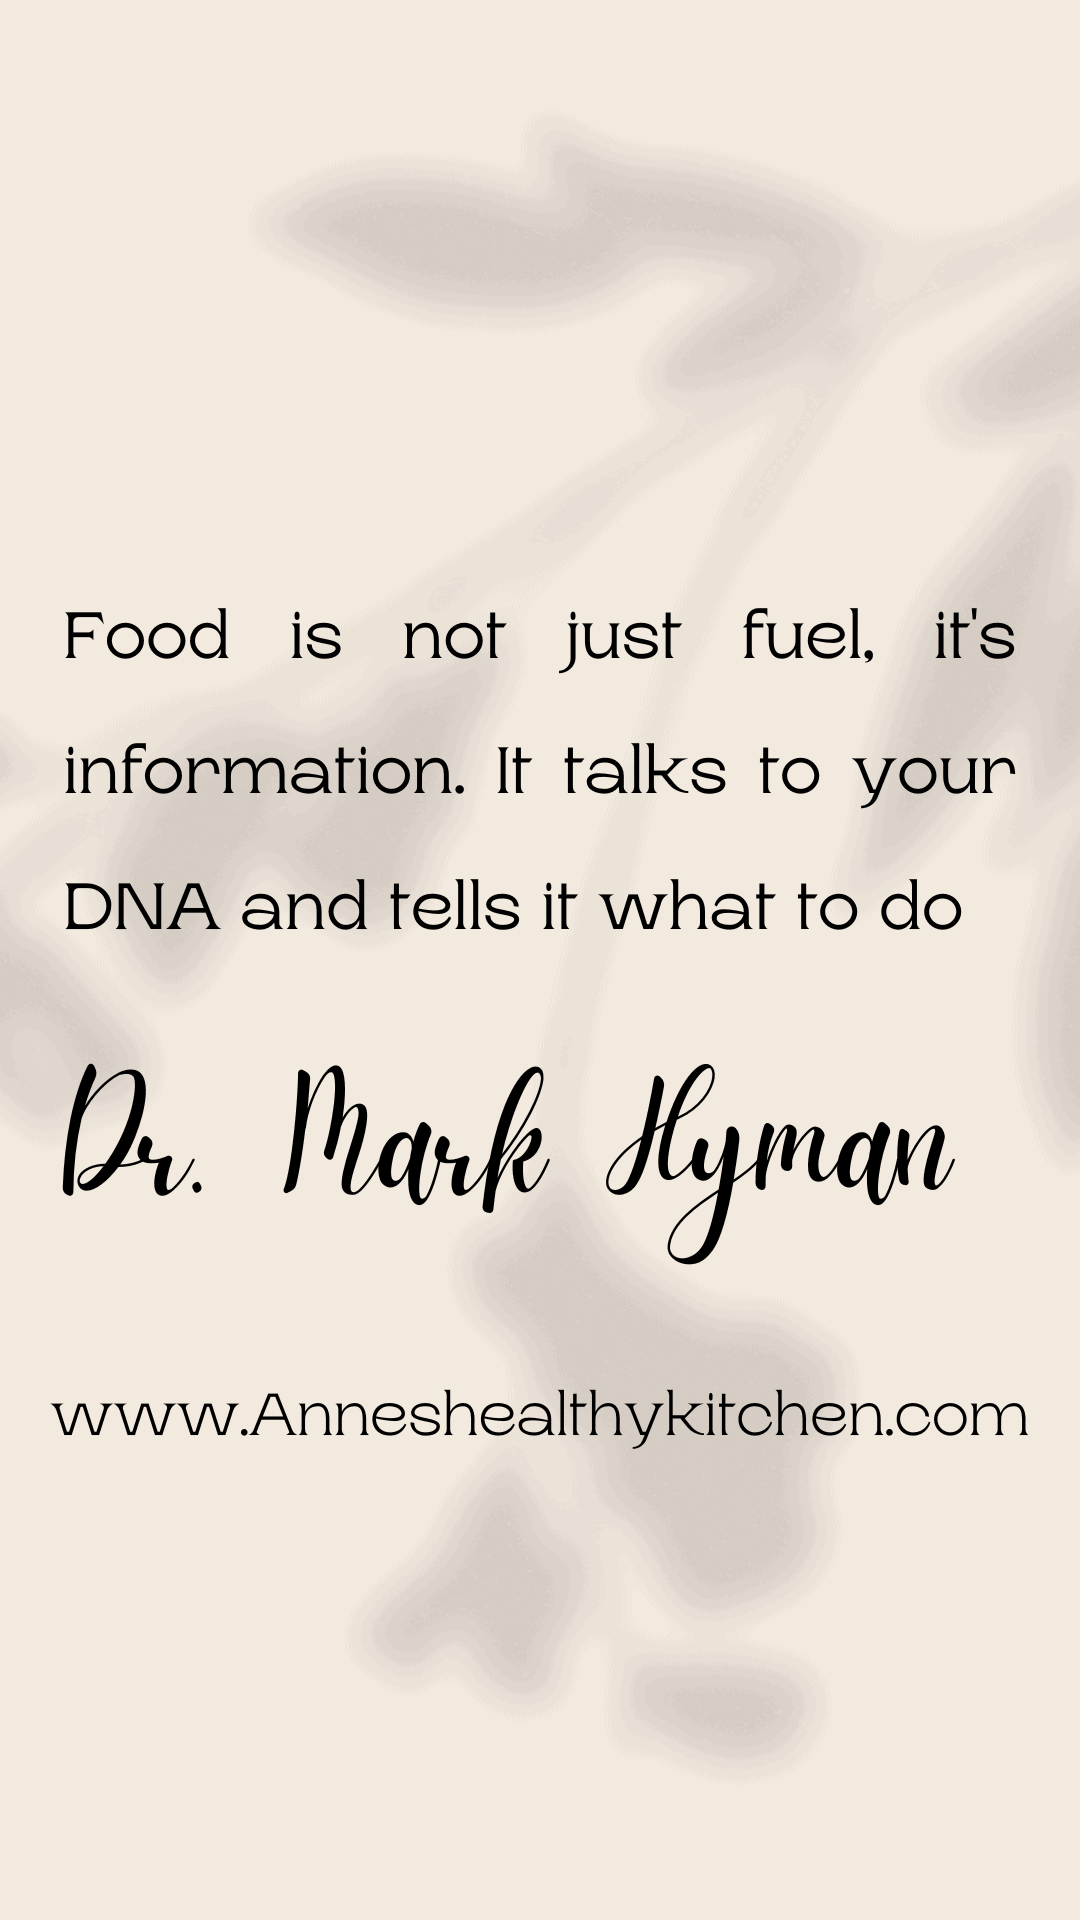 Food is not just fuel, it's information. It talk to your DNA and tell it what to do